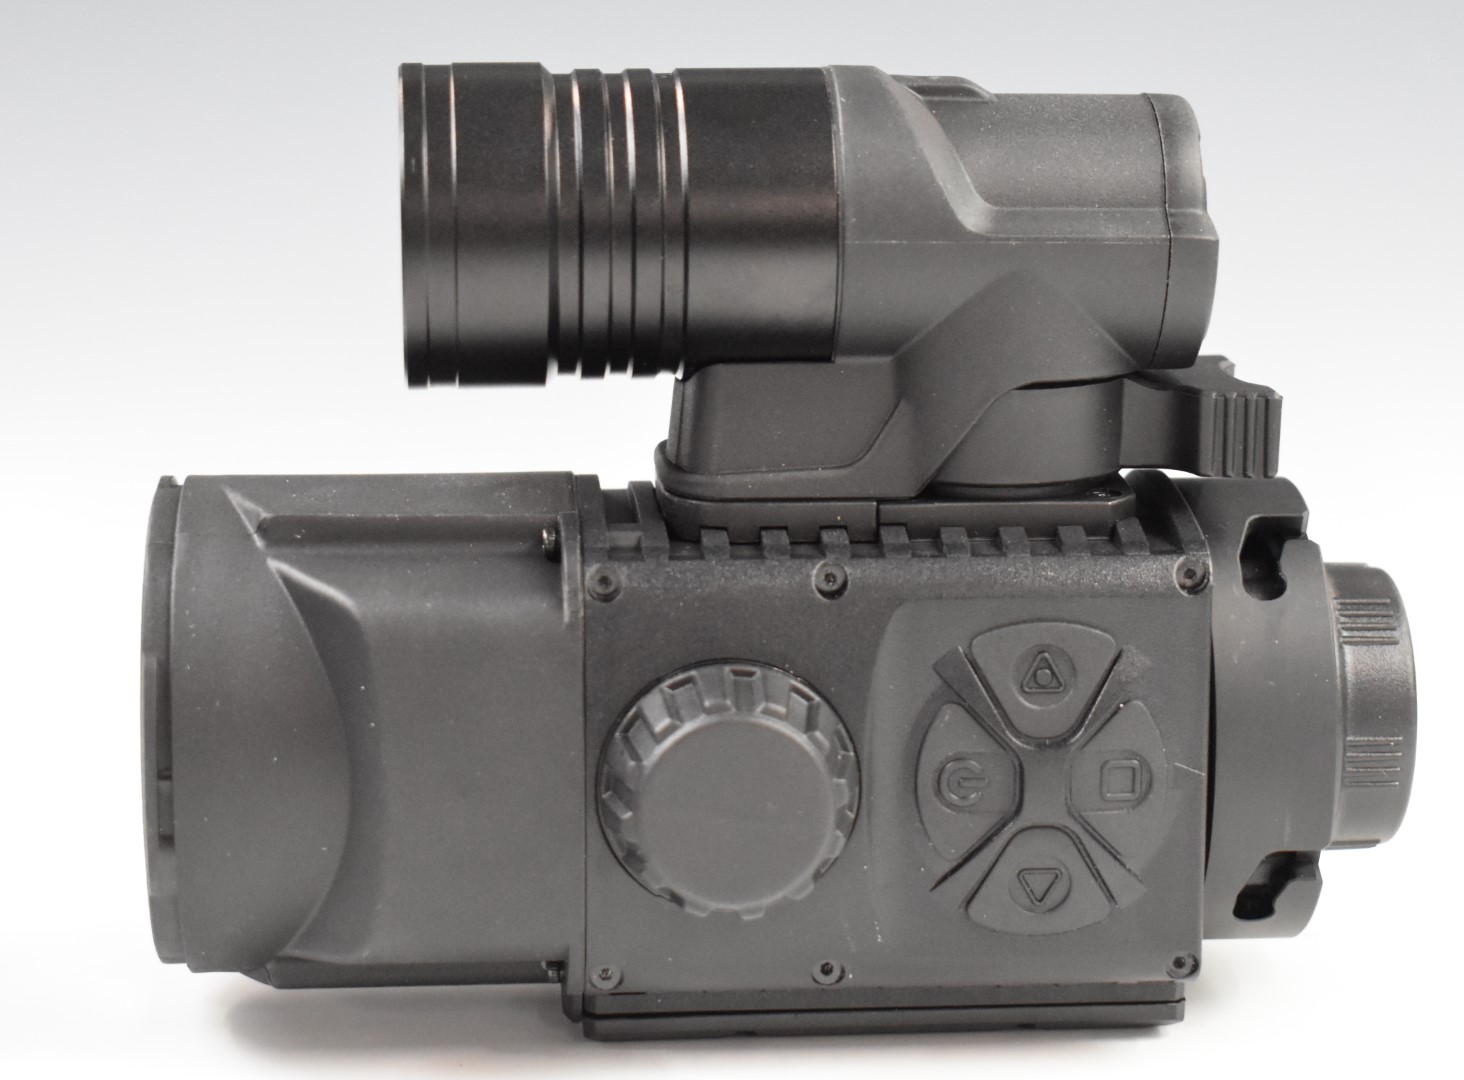 Pulsar Forward F455 digital night vision attachment to suit air rifle or similar scope, in - Image 3 of 10